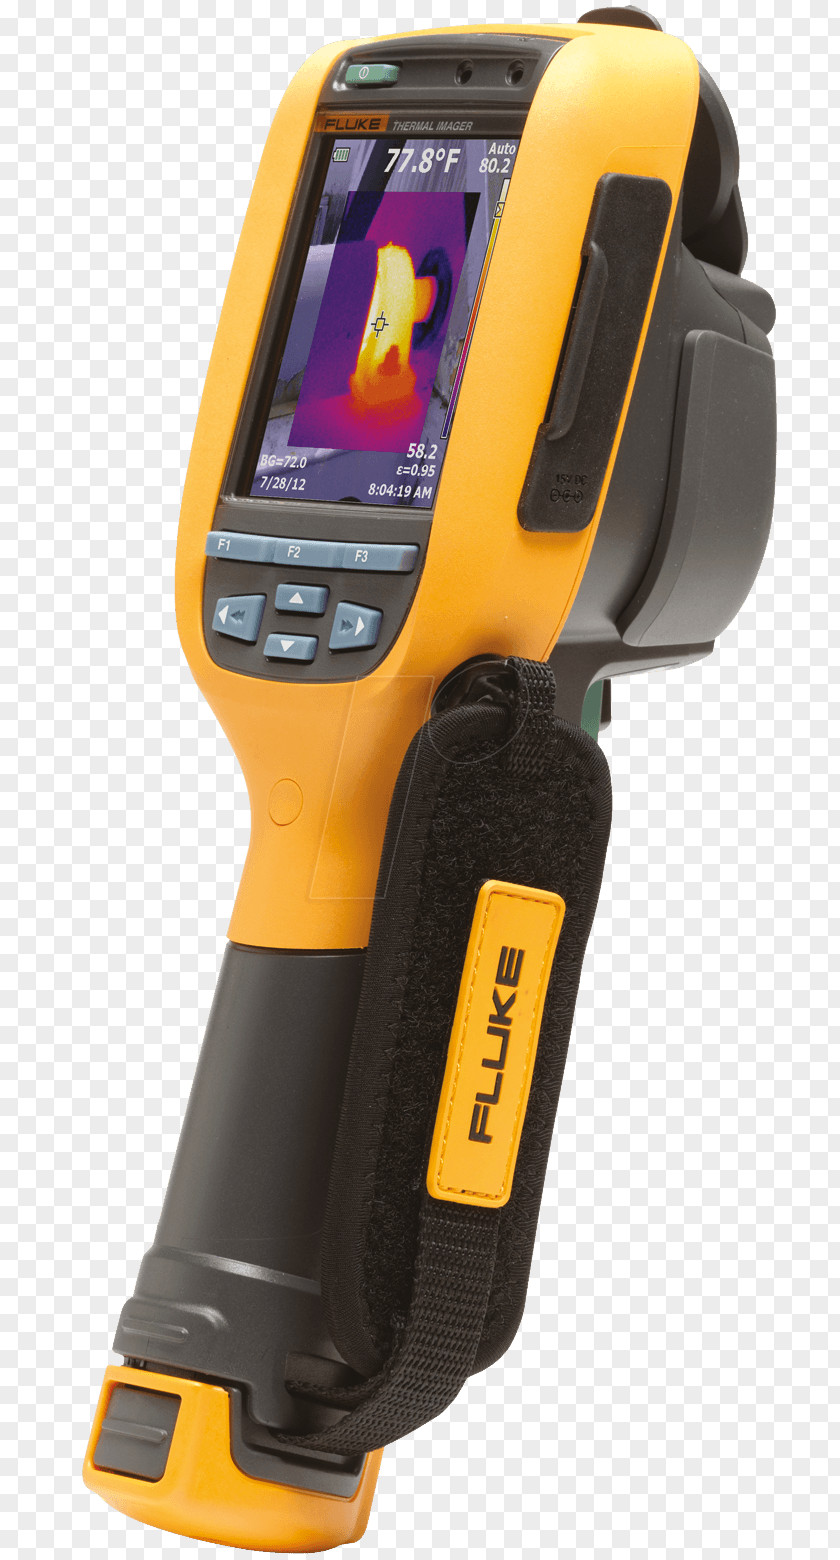 Camera Thermography Thermal Imaging Thermographic Fluke Corporation PNG